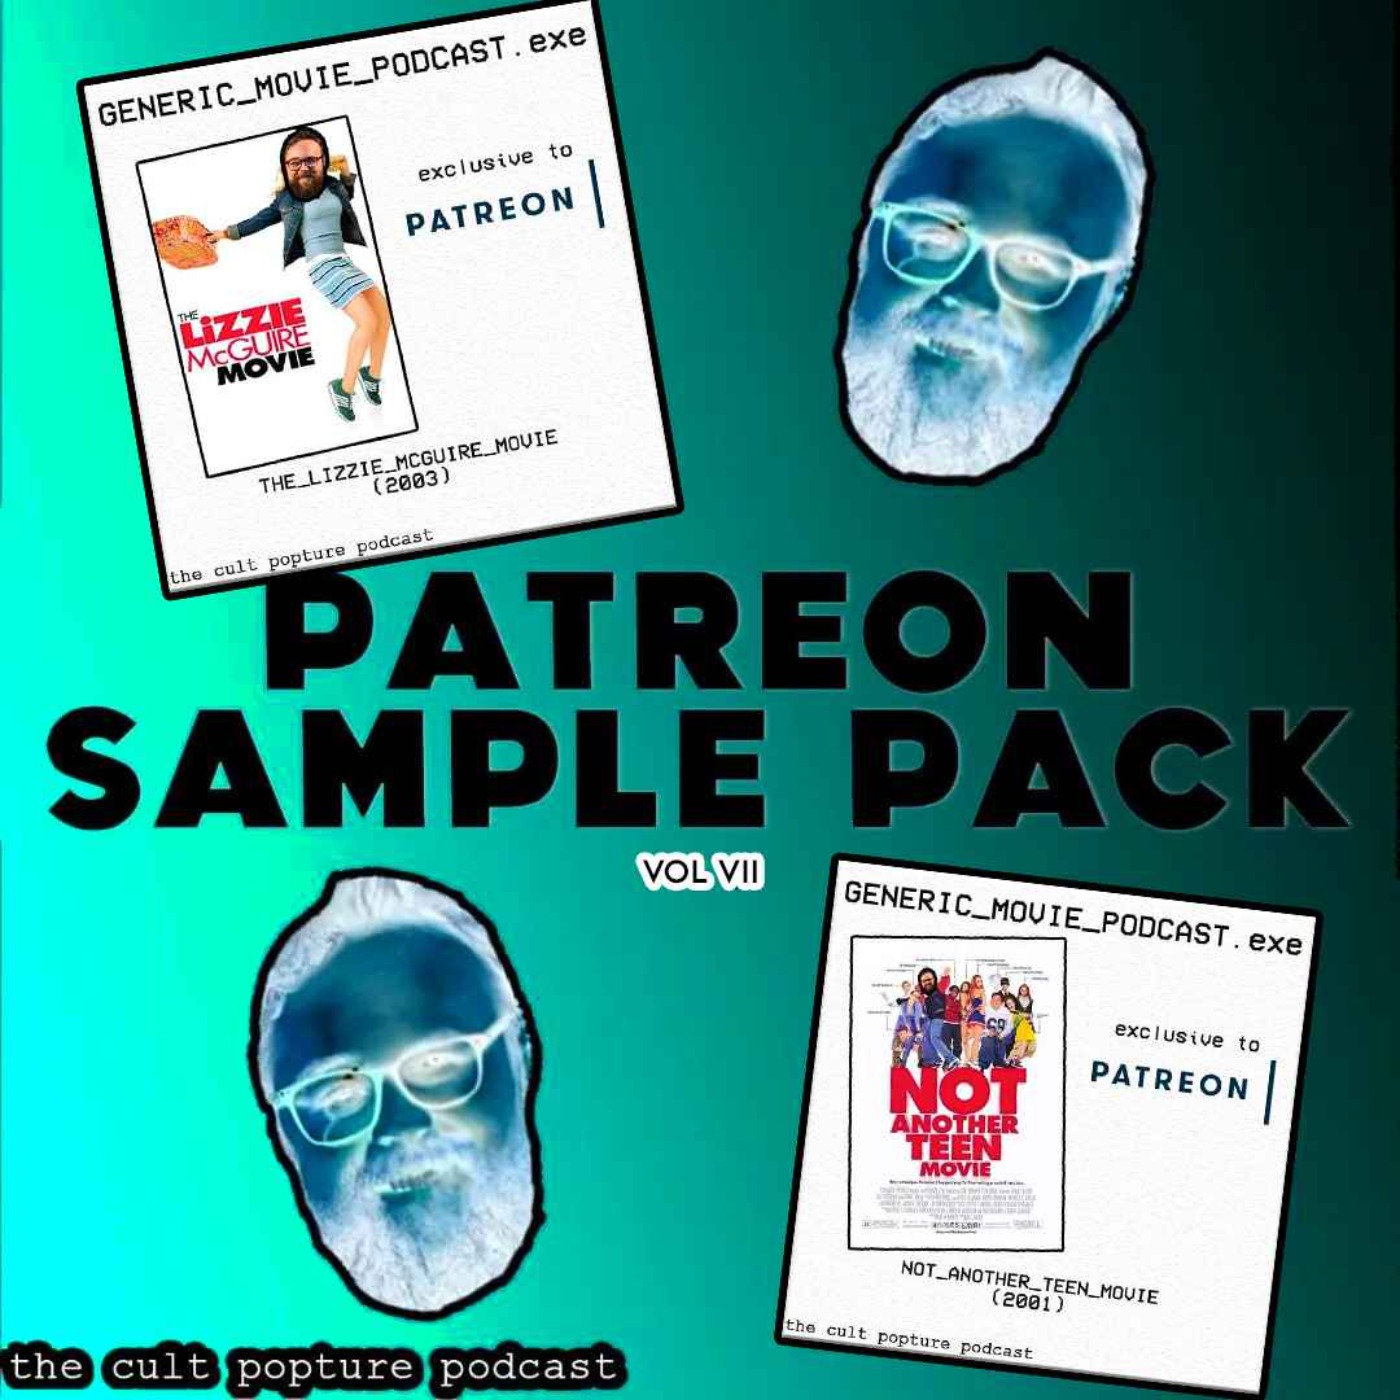 THE LIZZIE MAGUIRE MOVIE and NOT ANOTHER TEEN MOVIE | Patreon Sample Pack